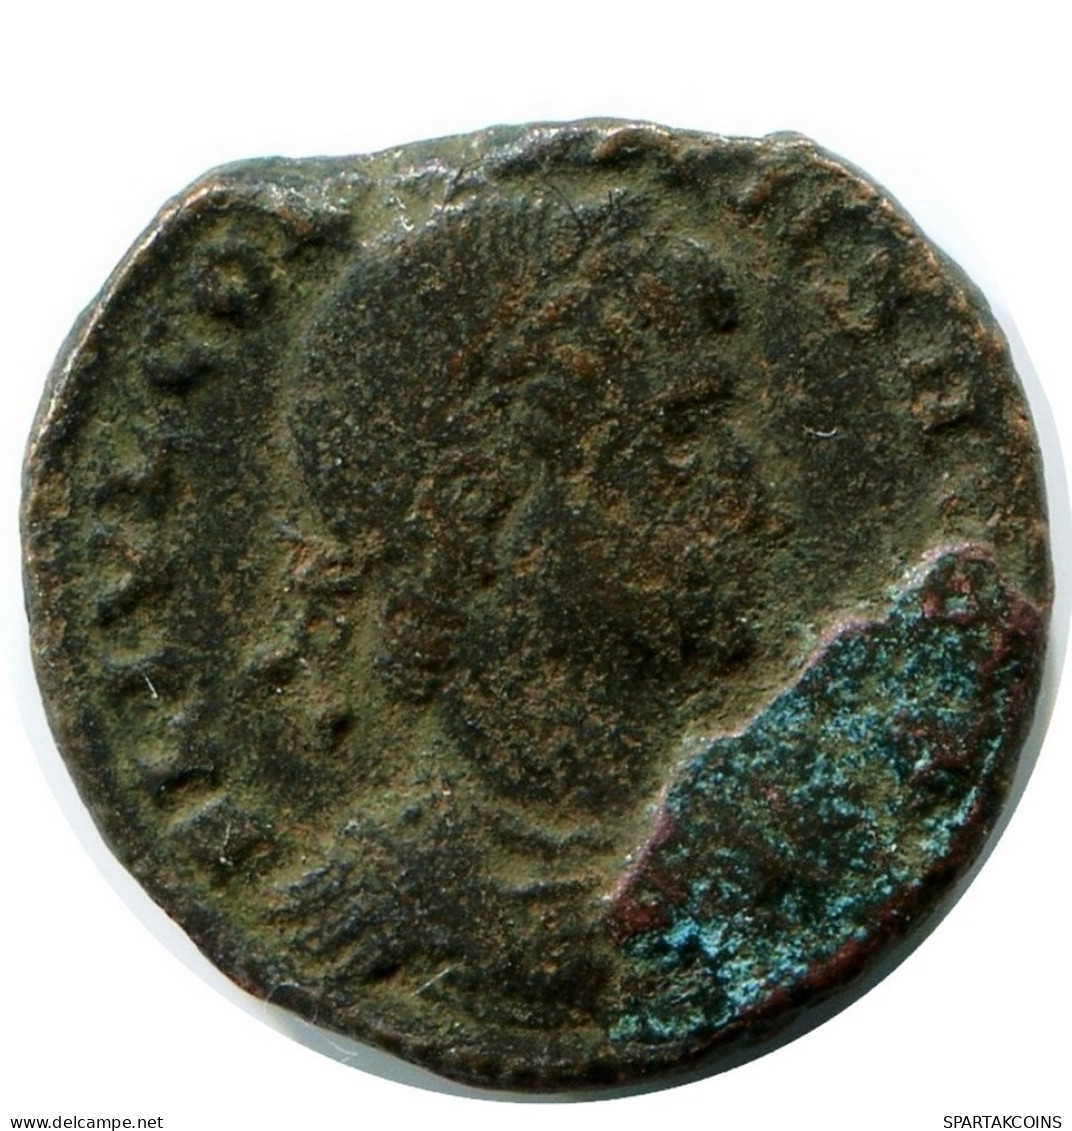 CONSTANS MINTED IN ANTIOCH FOUND IN IHNASYAH HOARD EGYPT #ANC11815.14.D.A - El Impero Christiano (307 / 363)